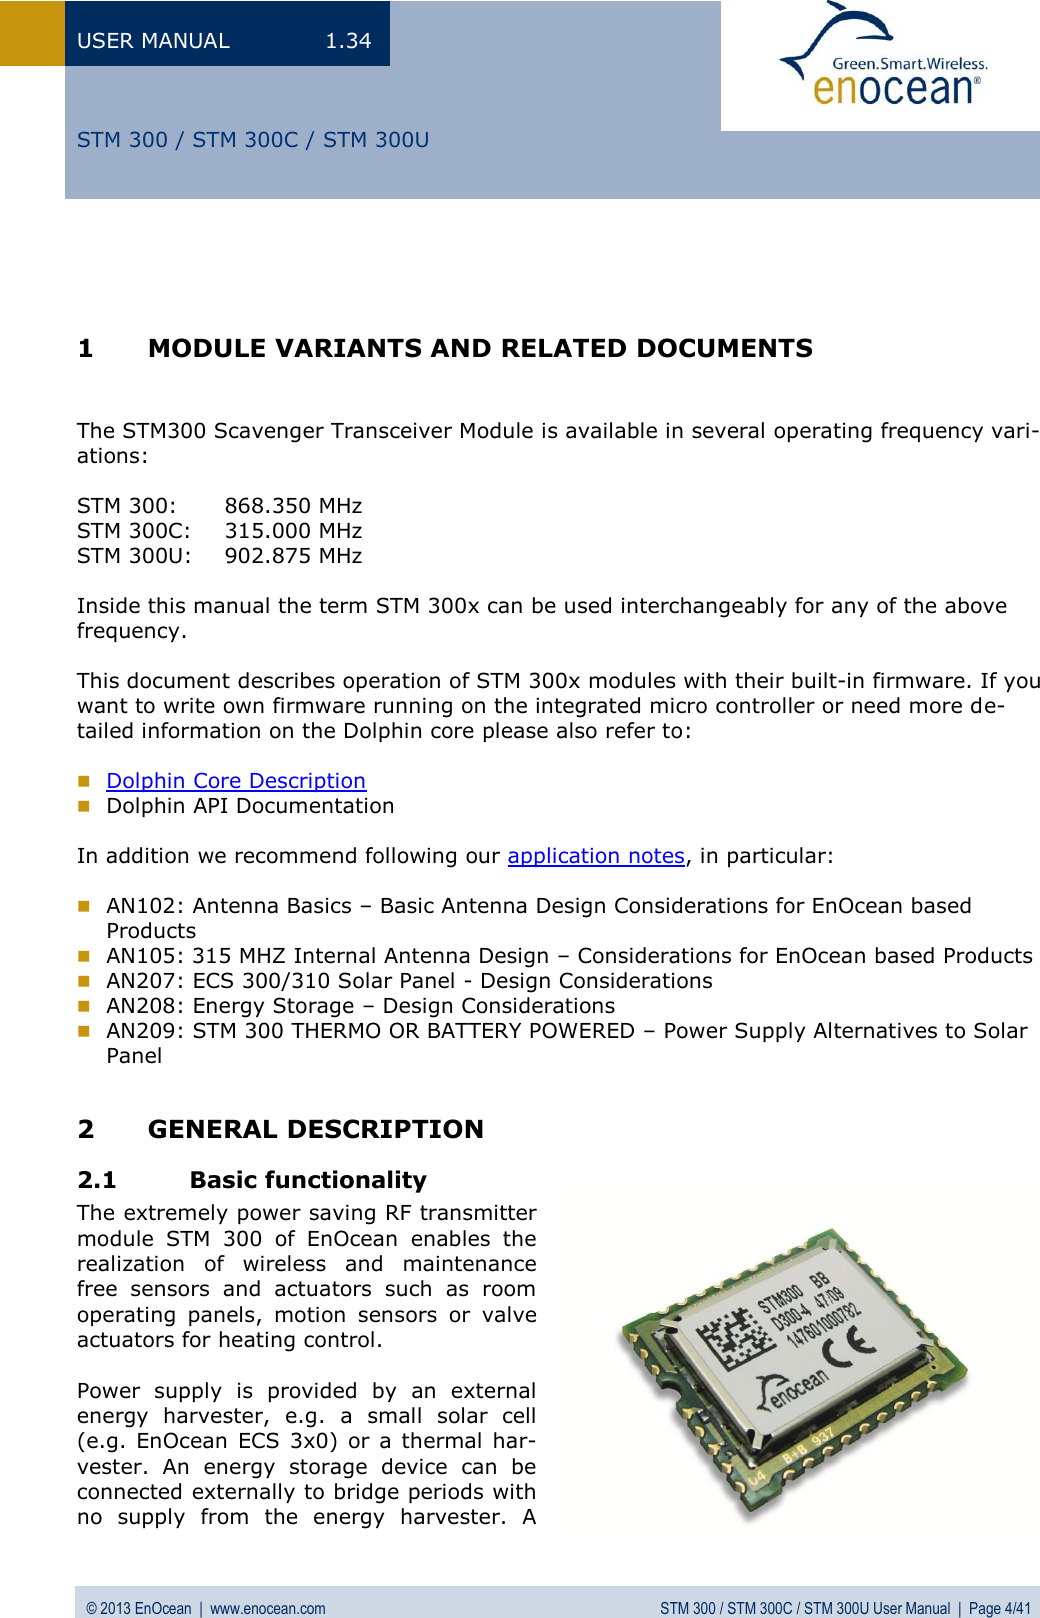 USER MANUAL  1.34 © 2013 EnOcean  |  www.enocean.com  STM 300 / STM 300C / STM 300U User Manual  |  Page 4/41   STM 300 / STM 300C / STM 300U    1 MODULE VARIANTS AND RELATED DOCUMENTS   The STM300 Scavenger Transceiver Module is available in several operating frequency vari-ations:  STM 300:   868.350 MHz STM 300C:  315.000 MHz STM 300U:  902.875 MHz  Inside this manual the term STM 300x can be used interchangeably for any of the above frequency.   This document describes operation of STM 300x modules with their built-in firmware. If you want to write own firmware running on the integrated micro controller or need more de-tailed information on the Dolphin core please also refer to:   Dolphin Core Description  Dolphin API Documentation  In addition we recommend following our application notes, in particular:   AN102: Antenna Basics – Basic Antenna Design Considerations for EnOcean based  Products  AN105: 315 MHZ Internal Antenna Design – Considerations for EnOcean based Products  AN207: ECS 300/310 Solar Panel - Design Considerations  AN208: Energy Storage – Design Considerations  AN209: STM 300 THERMO OR BATTERY POWERED – Power Supply Alternatives to Solar Panel  2 GENERAL DESCRIPTION 2.1 Basic functionality The extremely power saving RF transmitter module  STM  300  of  EnOcean  enables  the realization  of  wireless  and  maintenance free  sensors  and  actuators  such  as  room operating  panels,  motion  sensors  or  valve actuators for heating control.  Power  supply  is  provided  by  an  external energy  harvester,  e.g.  a  small  solar  cell (e.g. EnOcean  ECS  3x0) or a thermal  har-vester.  An  energy  storage  device  can  be connected externally to bridge periods with no  supply  from  the  energy  harvester.  A 